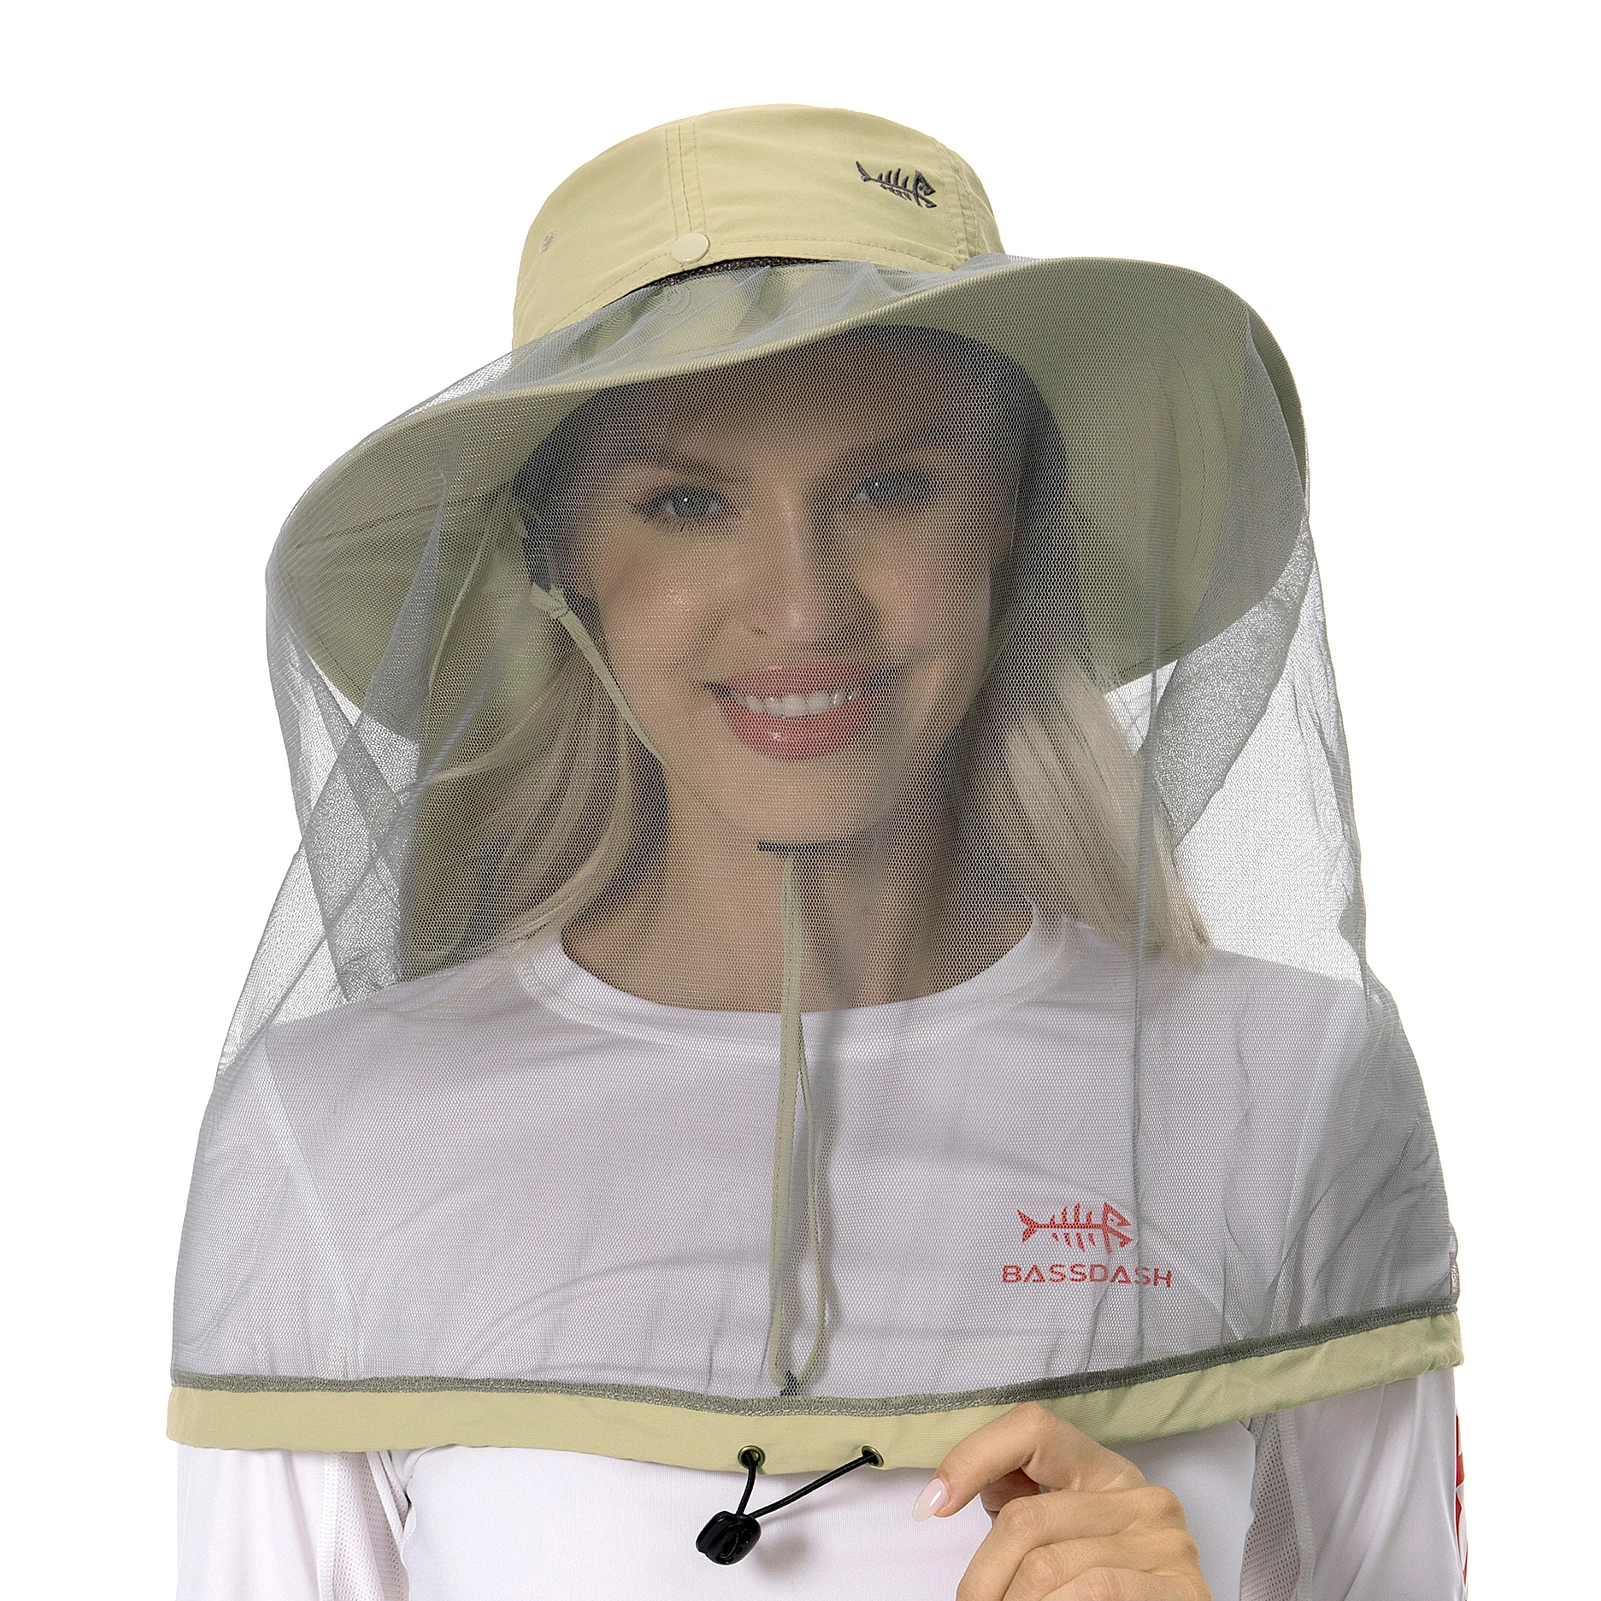 Bassdash UPF 50+ Mosquito Sun Hat with Hidden Head Net and Neck Flap for Men Women Outdoor Fishing Hiking Camping